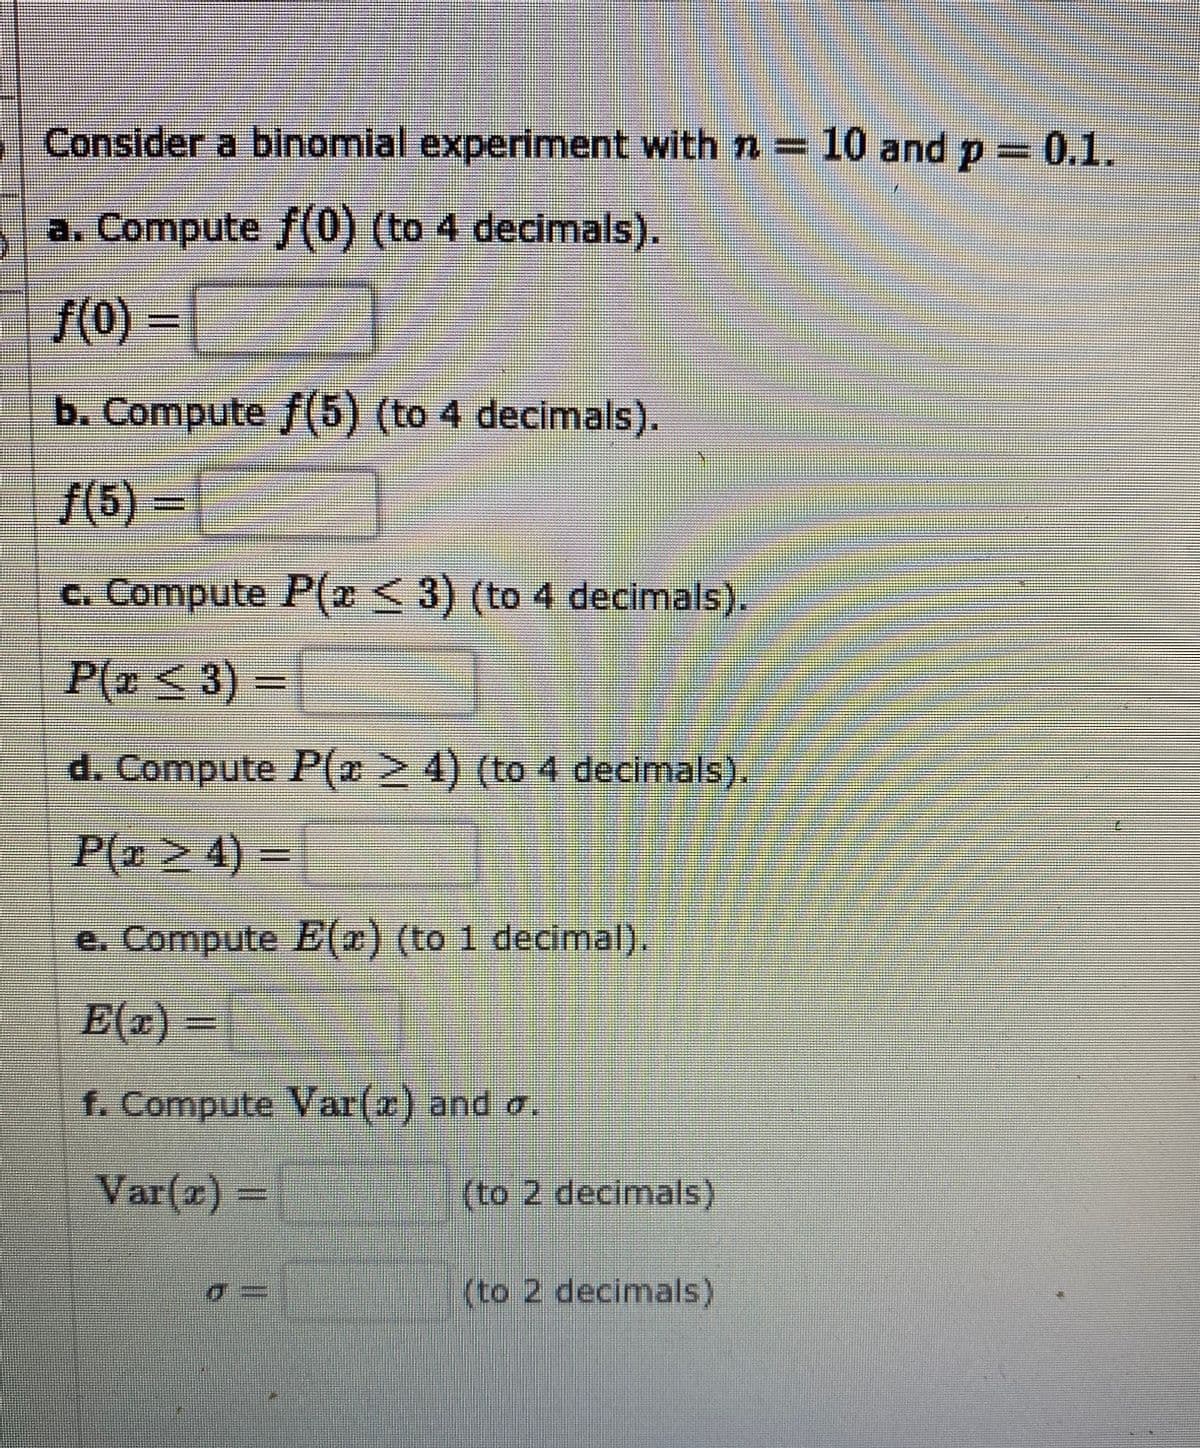 Consider a binomial experiment with n = 10 and p =0.1.
a. Compute f(0) (to 4 decimals).
/(0)% =
b. Compute f(5) (to 4 decimals).
f(5) =
c. Compute P(2<3) (to 4 decimals).
P(z<3)
d. Compute P(e24) (to 4 decimals).
- P(ळ> 4) =
e. Compute E(2) (to 1 decimal).
E(x) =
f. Compute Var(a) and a.
Var(x)=
(to 2 decimals)
(to 2 decimals)
